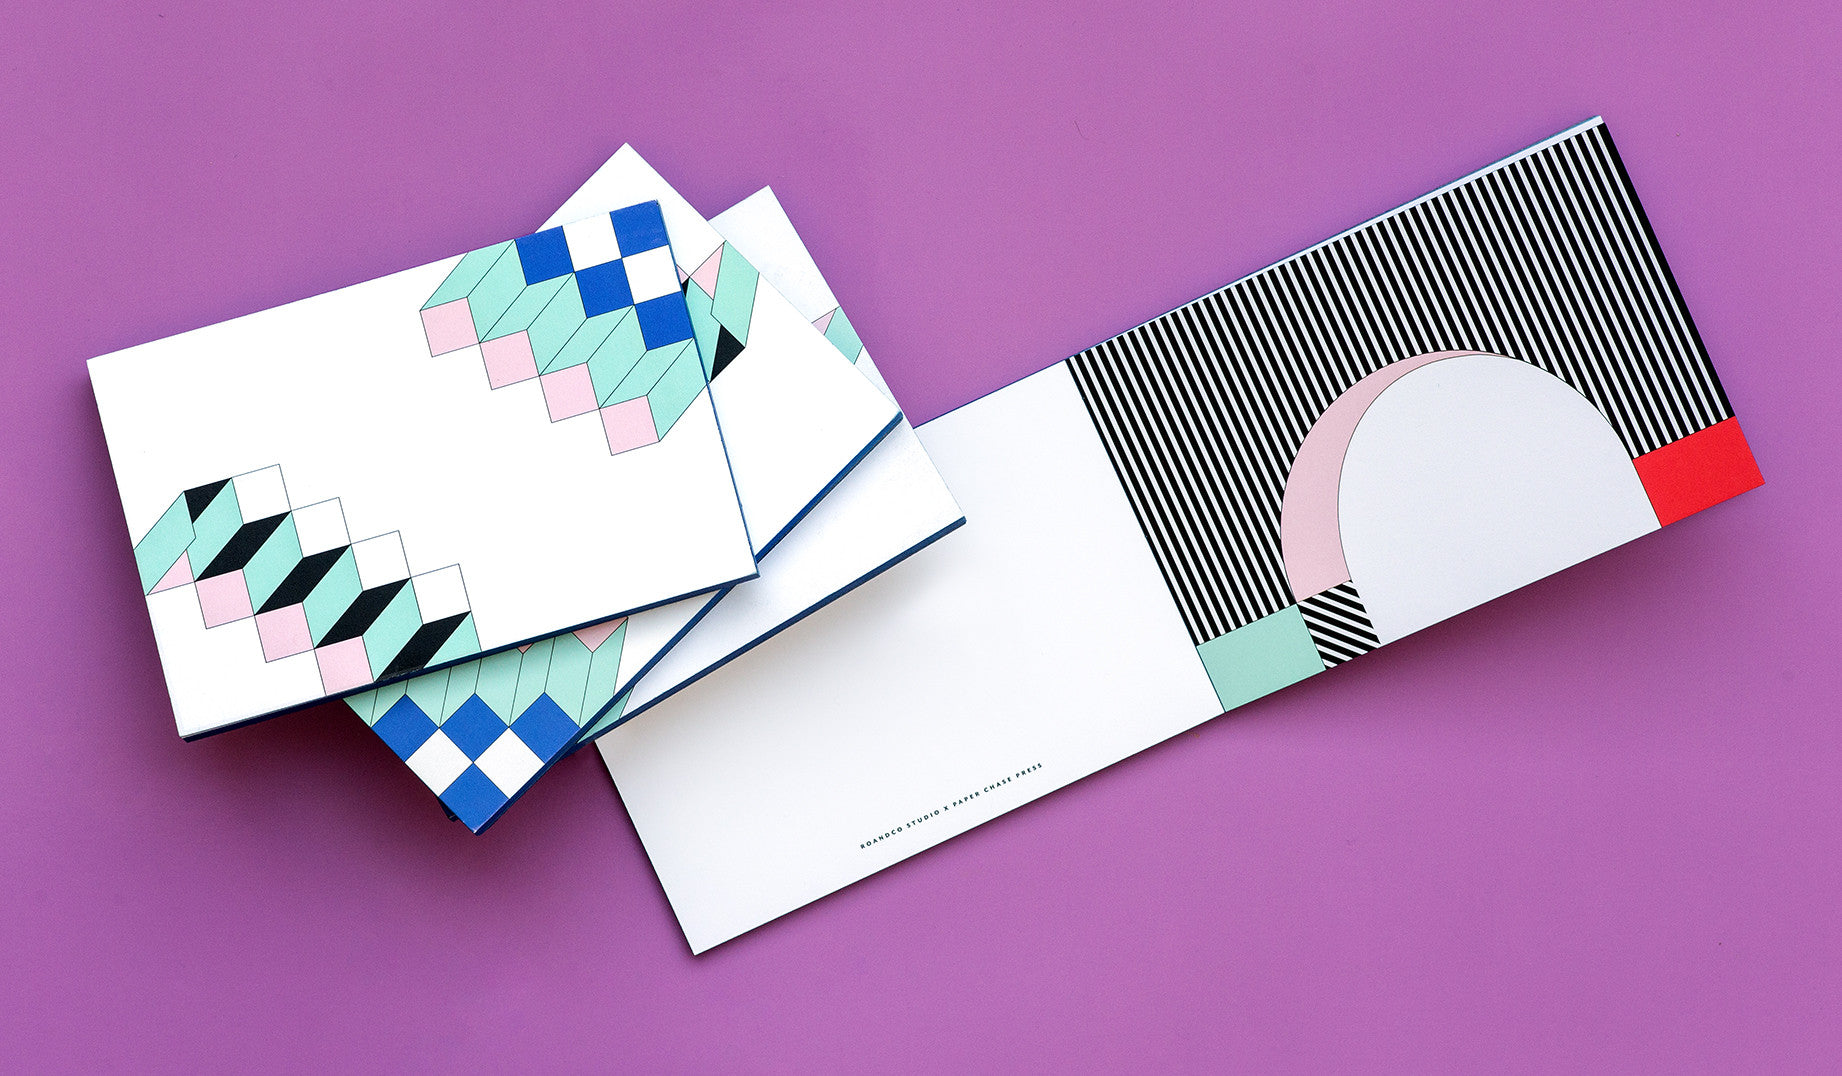 This lively notepad from creative firm RoAndCo features nine distinct Memphis-inspired postcards printed on our classic double thick, bright white uncoated paper, with blue colored edges. <br/><br/>We sat down with Roanne Adams, RoAndCo Chief Creative Director, Founder and self-proclaimed "Art Director, Big Picture Brand Thinker, Boss Lady, Client Therapist, Creative Collaborator, Design Critiquer, Entrepreneur, HR Manager, Public Speaker" for a look into her world.